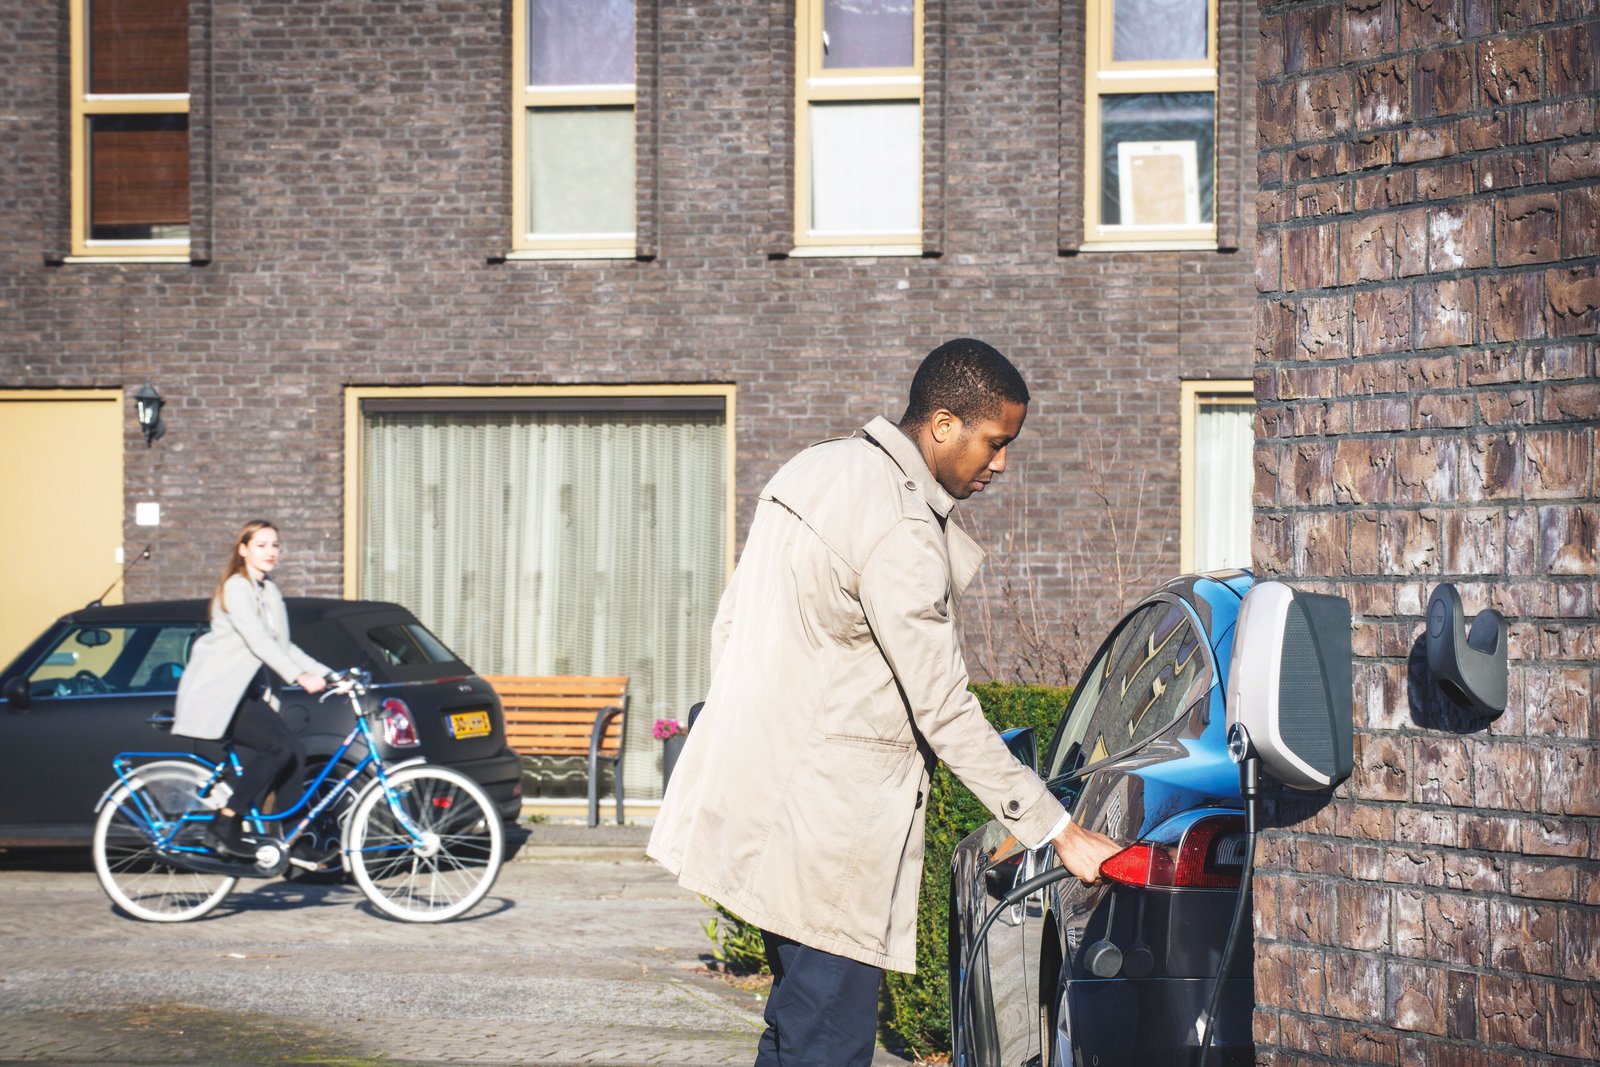 A casually dressed man plugging in his electric car outside a residential building on a sunny day. A cycling woman in the background is looking at the man.